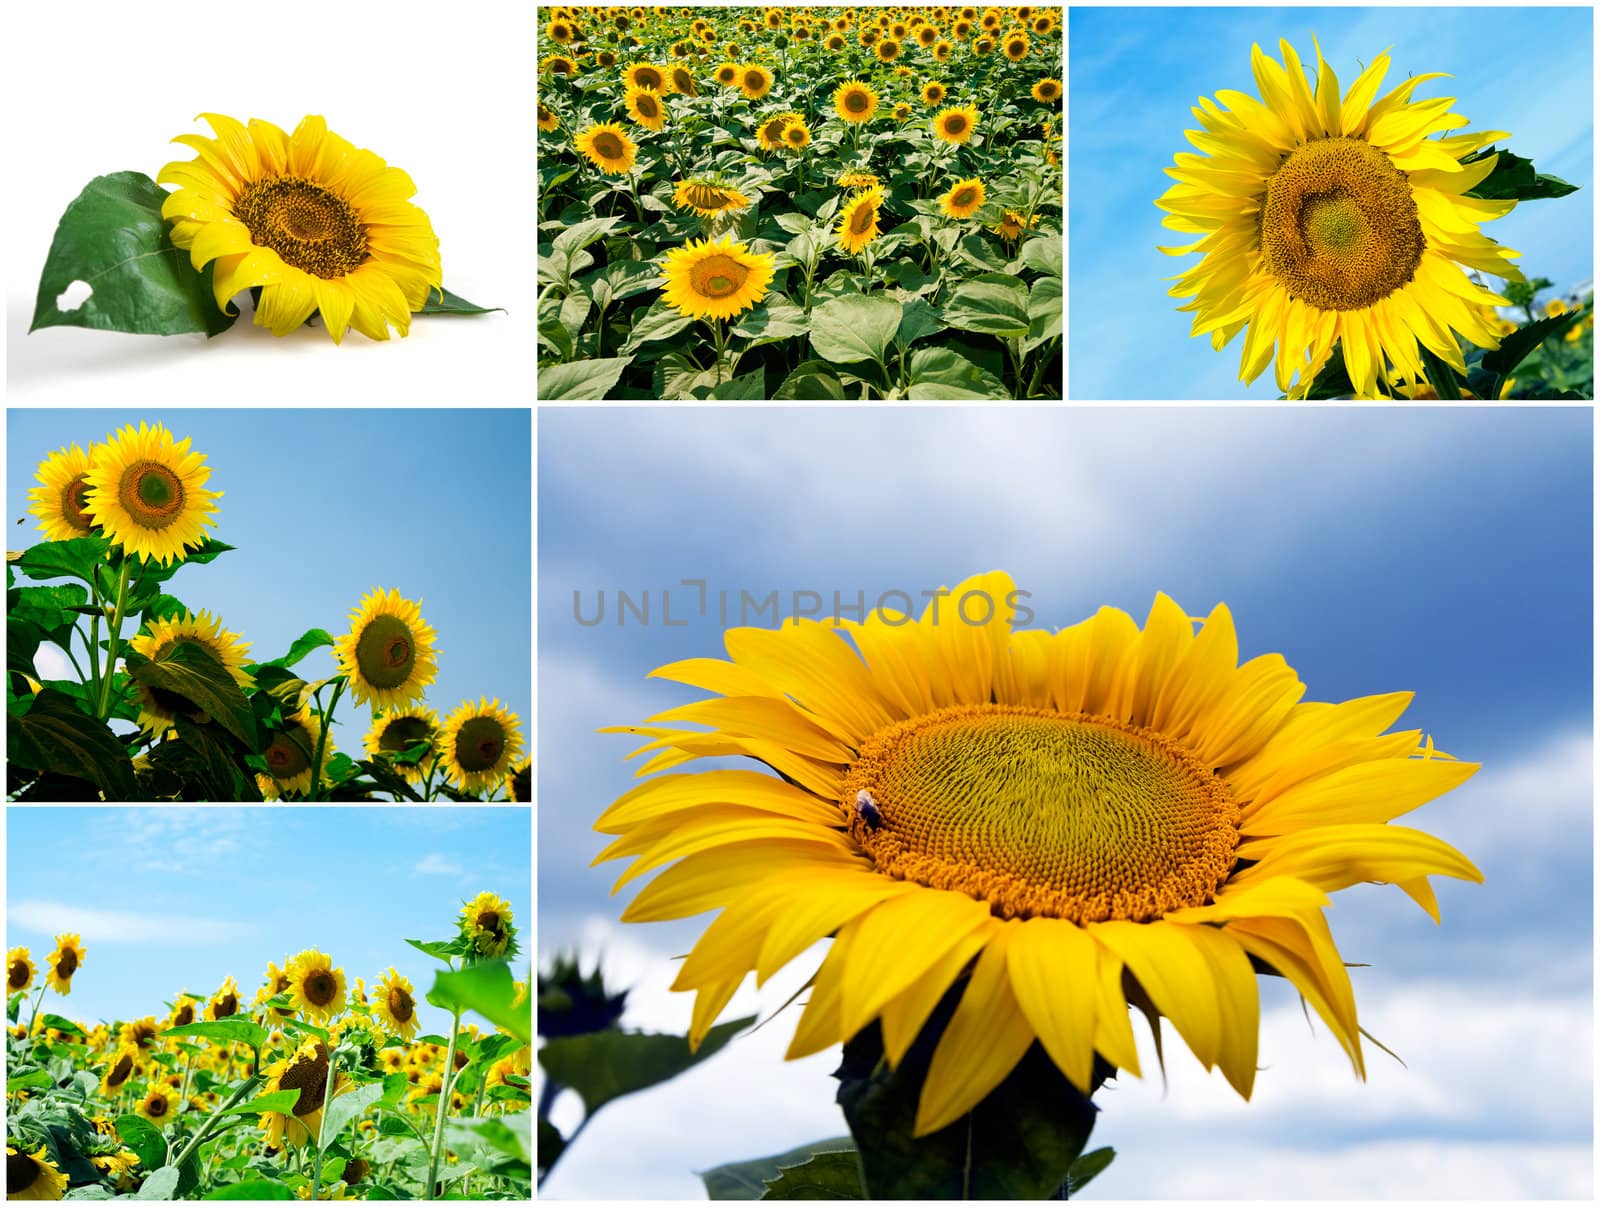 Bright sunflowers against the blue sky in summer day